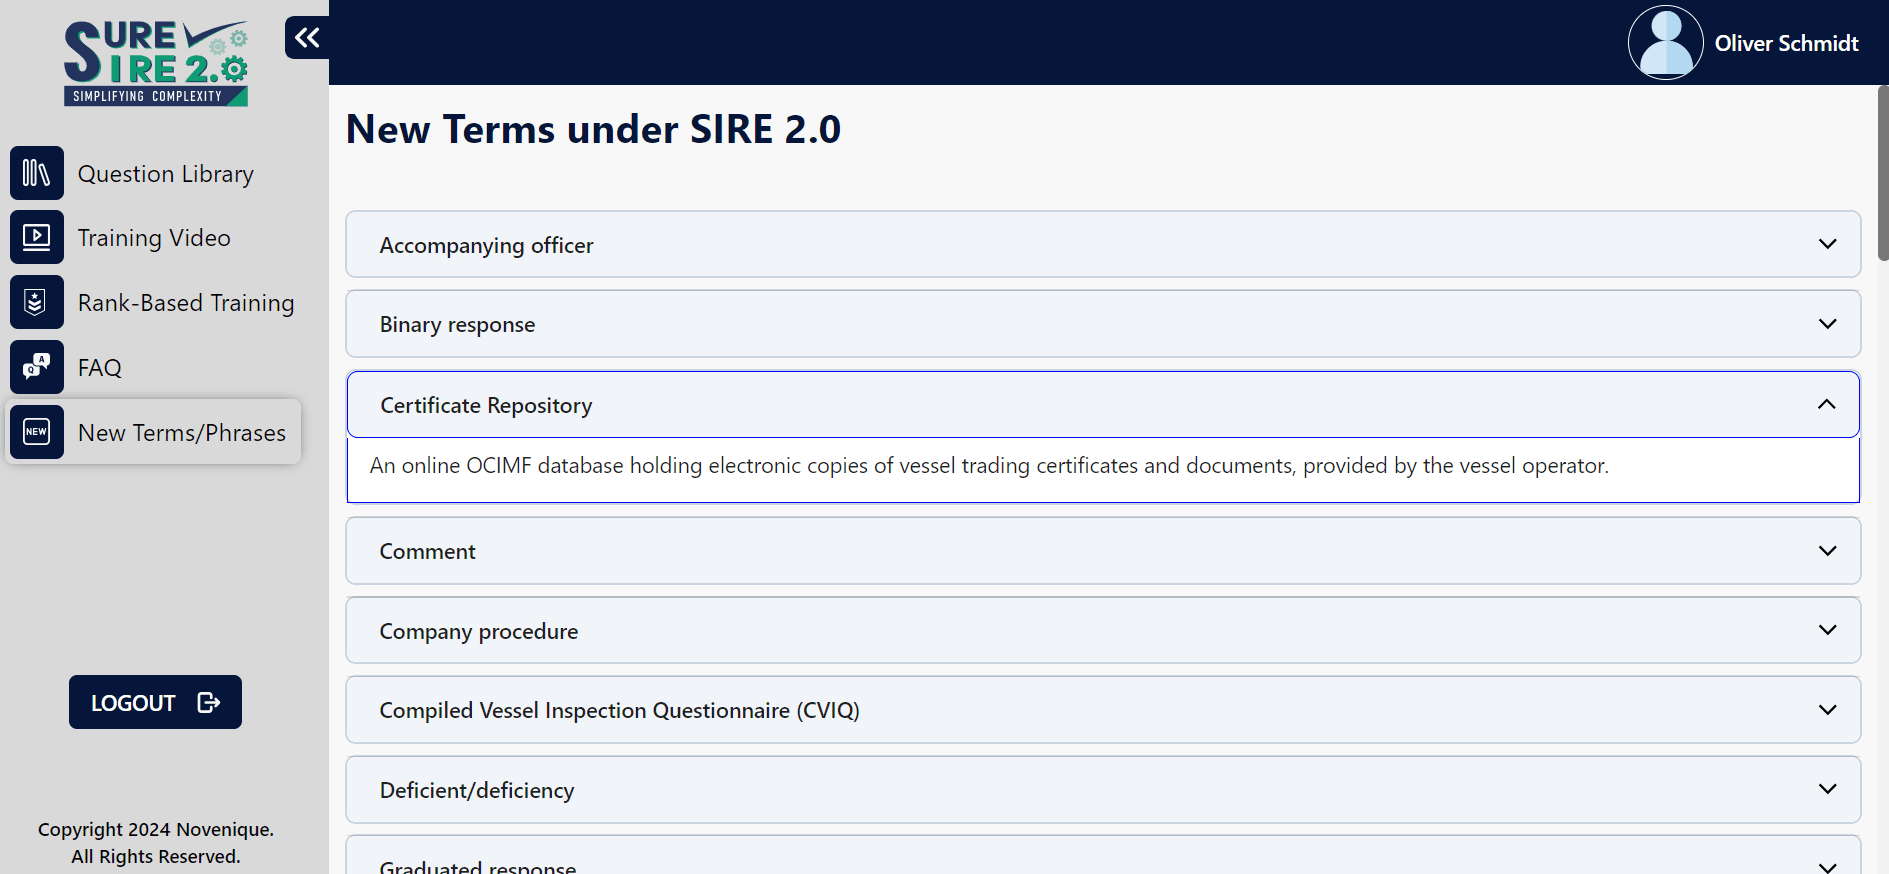 Screenshot of SureSIRE 2.0 - New terms & phrases